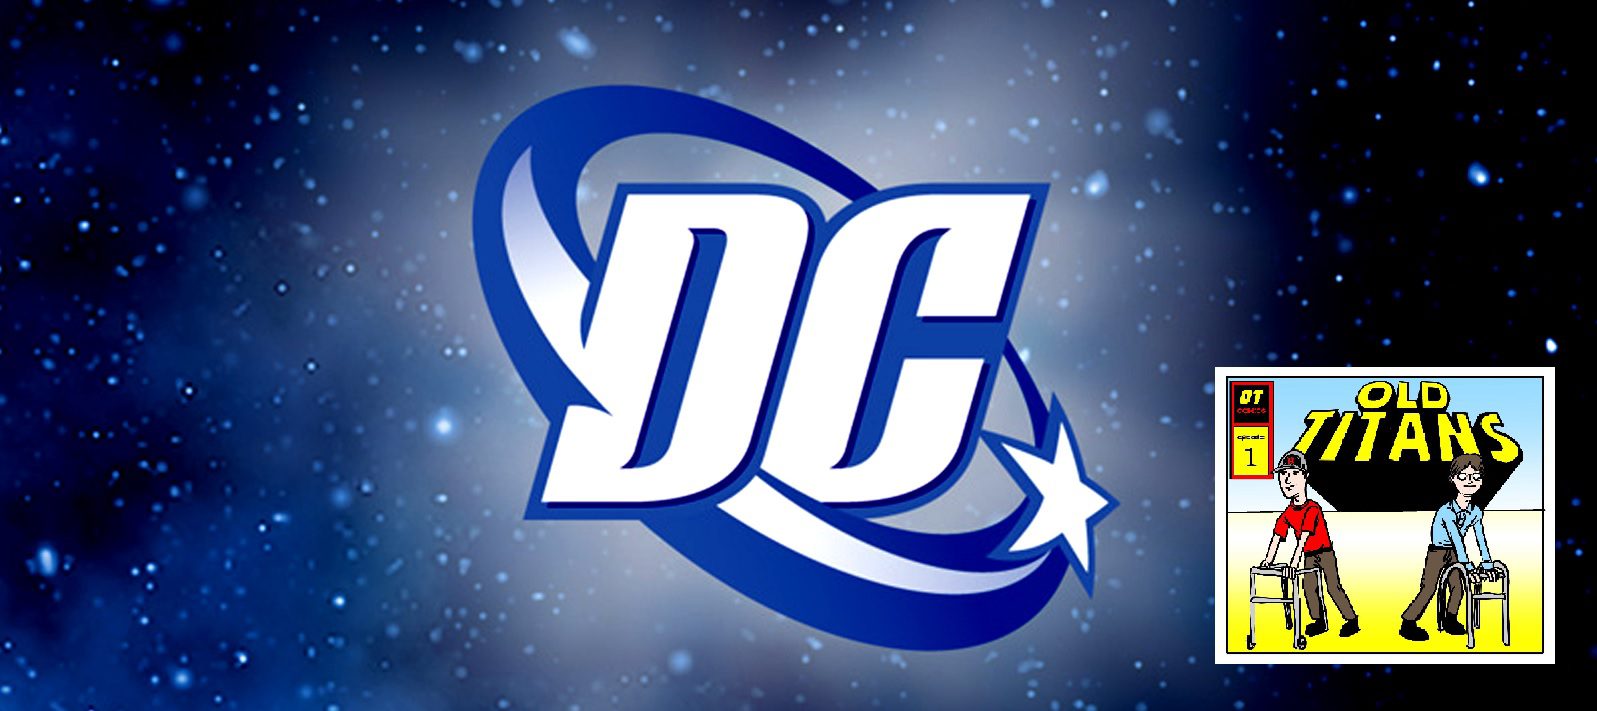 What’s going on with DC Comics?